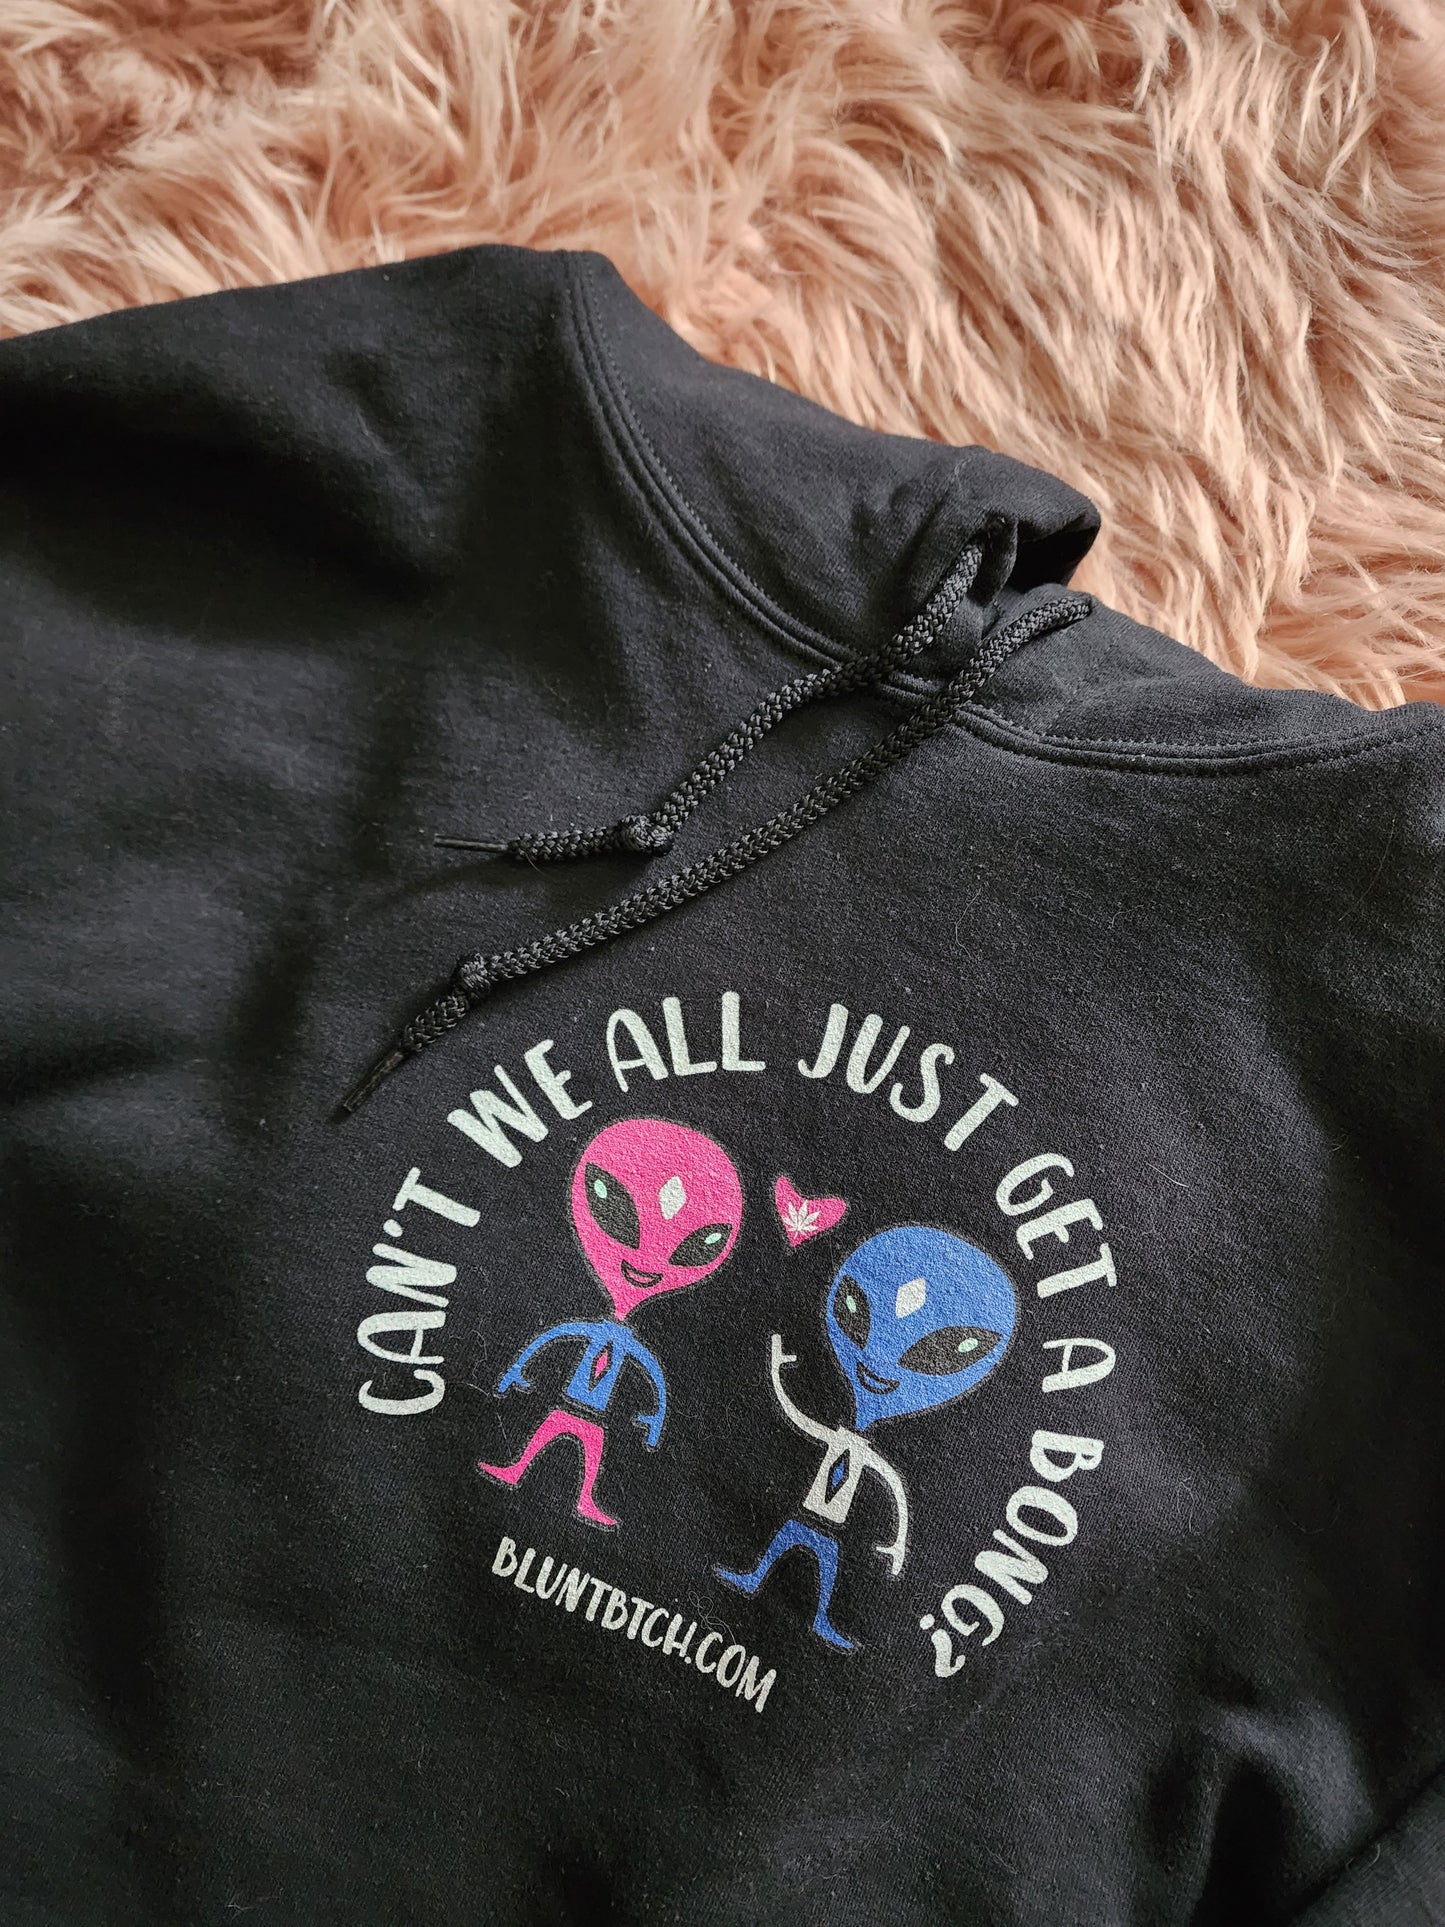 Can't We All Just Get A Bong 420 Hoodie, Stoner Sweatshirt, Gifts for stoners